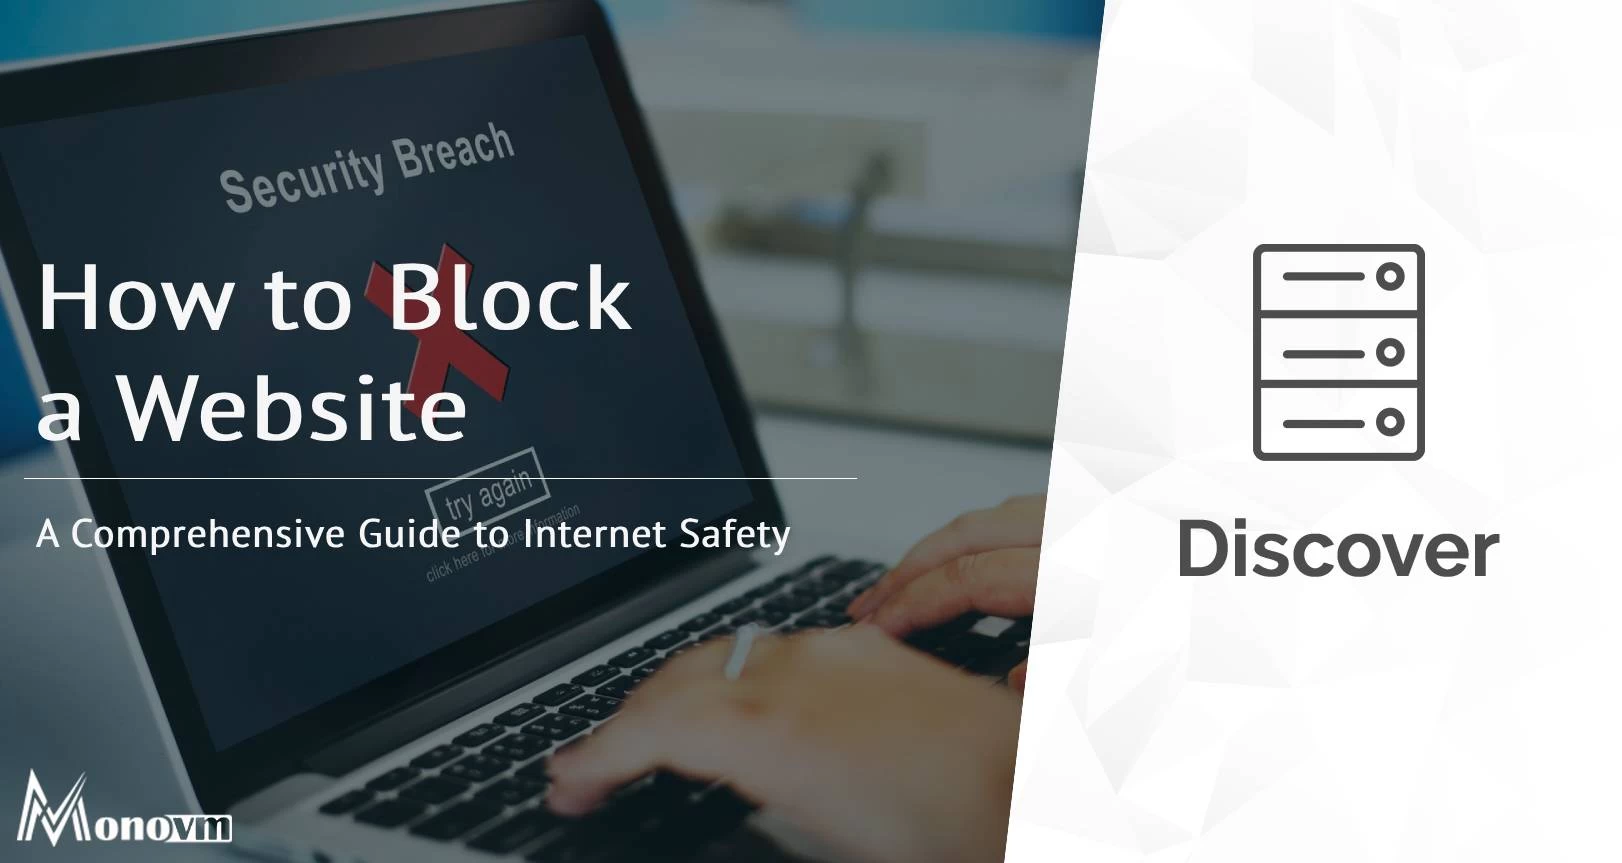 How to Block a Website: A Comprehensive Guide to Internet Safety